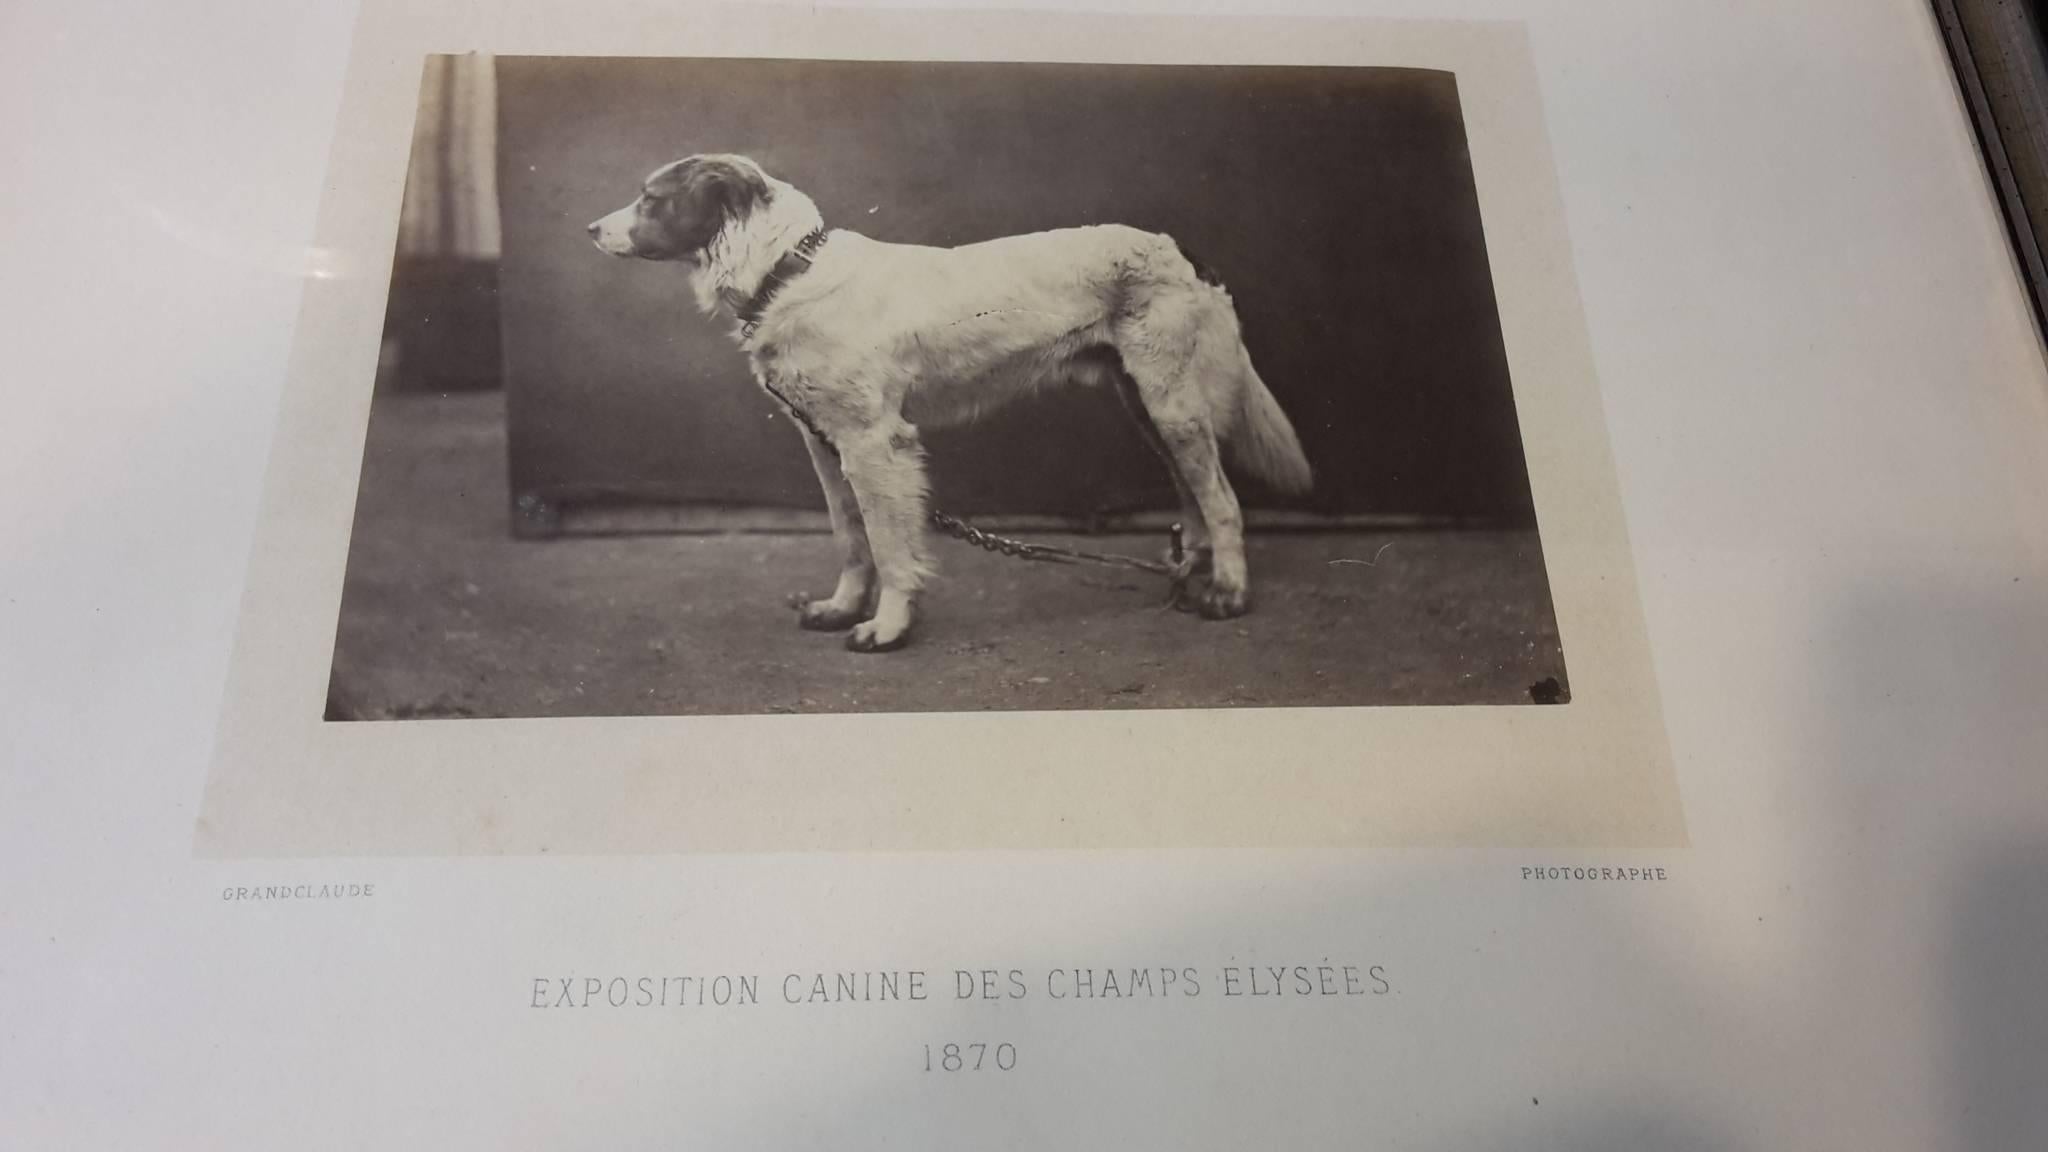 Photographs from 1870 portrait of dogs exposition canine des Champs Elysees / silver prints by Grandclaude recently framed.